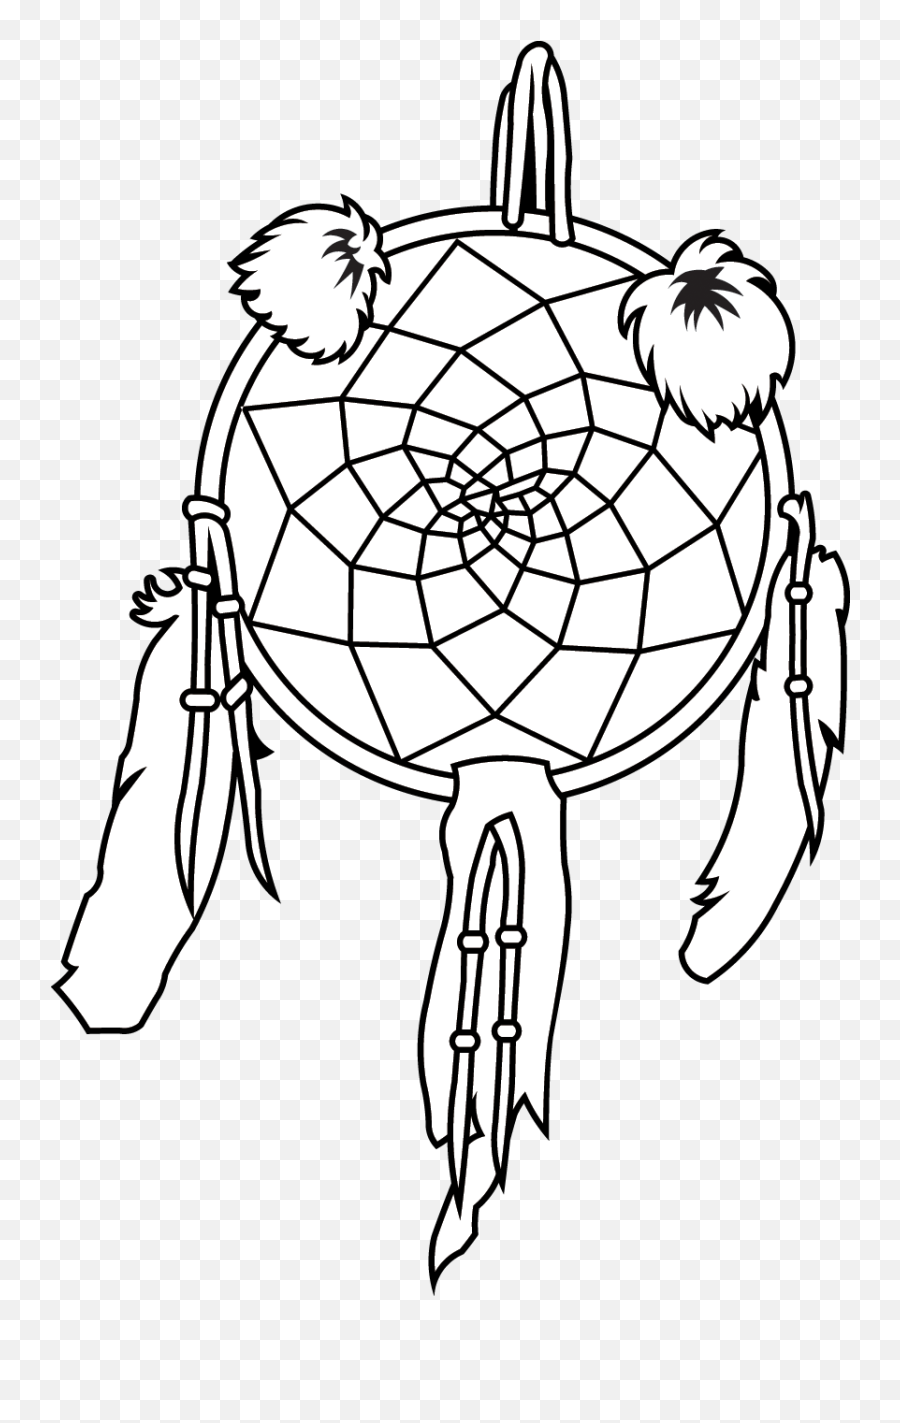 Dream Catcher - Line Art Full Size Png Download Seekpng Dot,Dream Catcher Icon